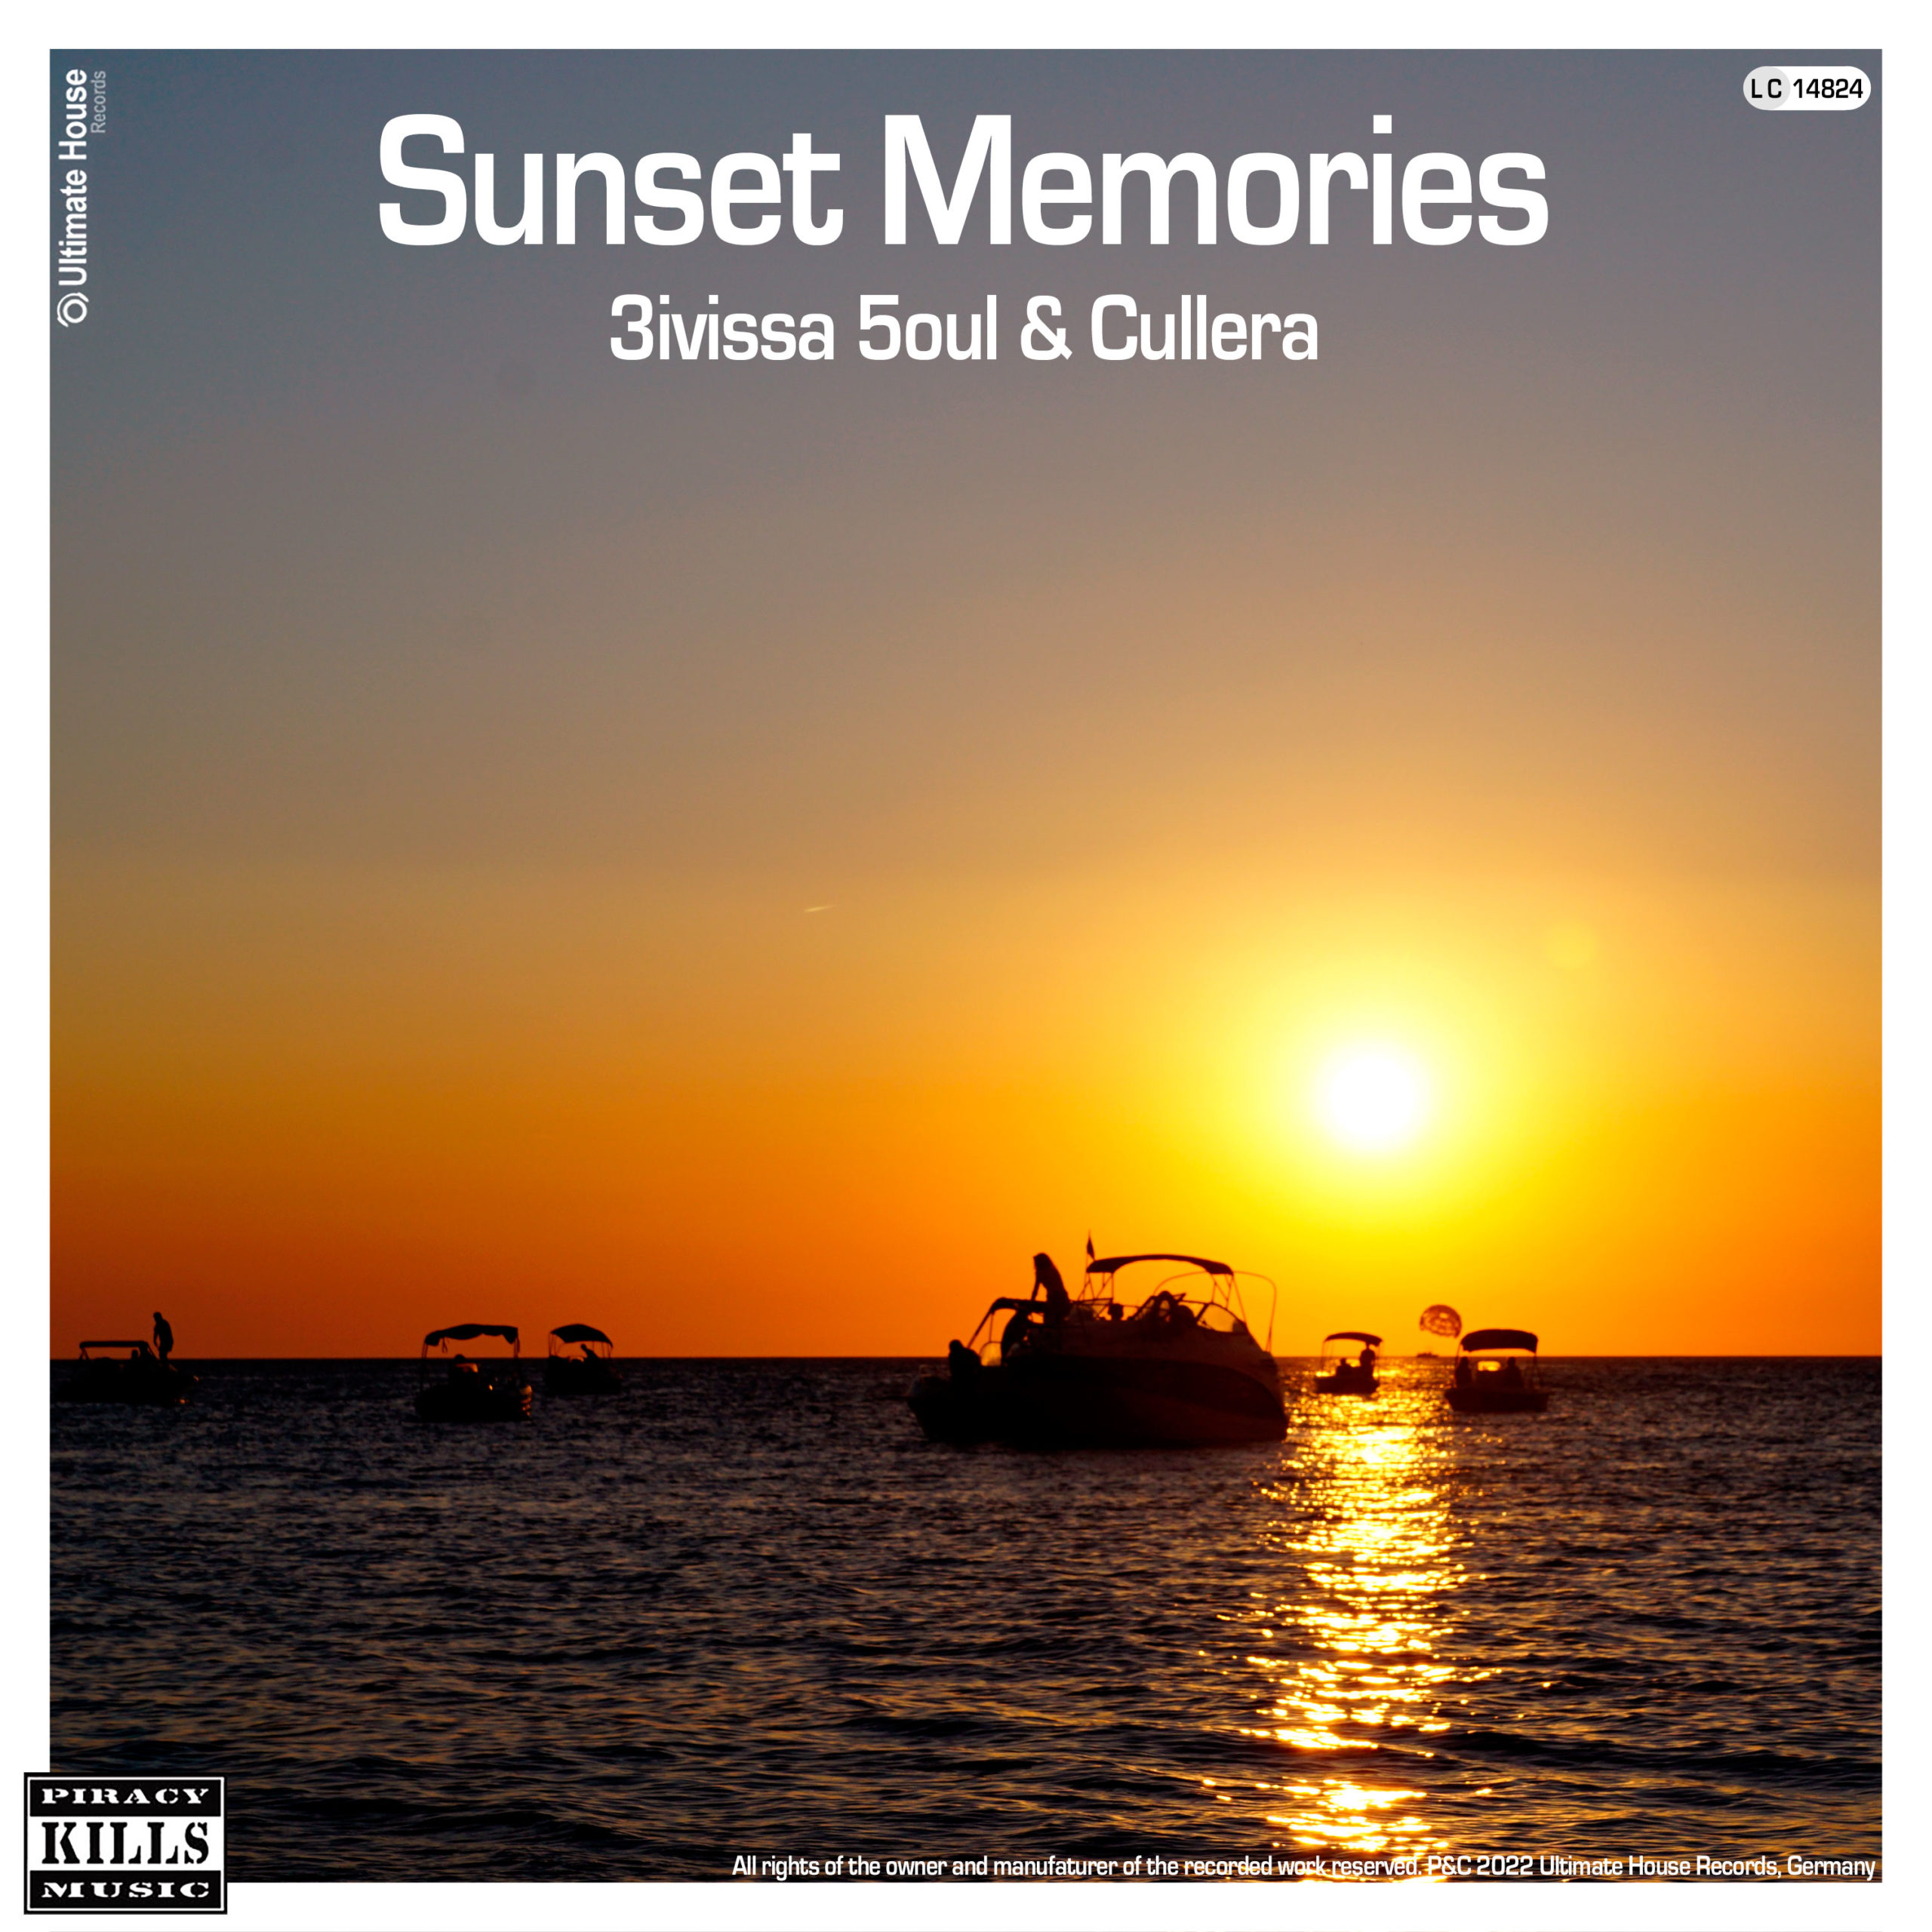 https://www.ultimate-house-records.com/wp-content/uploads/2022/02/156-Sunset_Memories-Cover_3000px_web-scaled.jpg